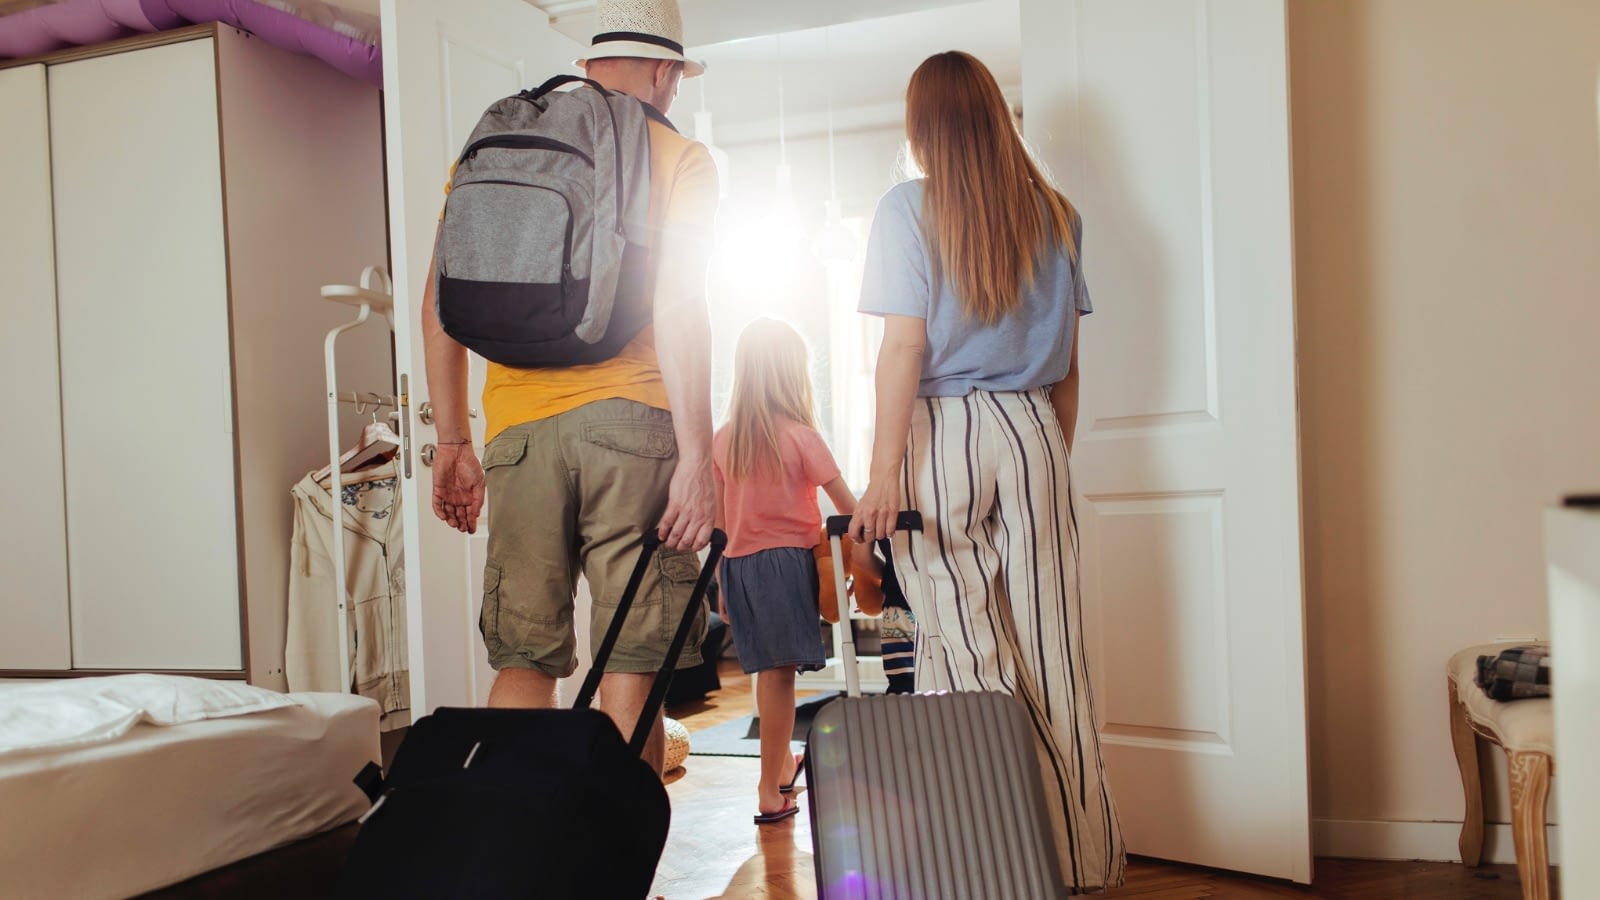 family of three leaving the house with luggage